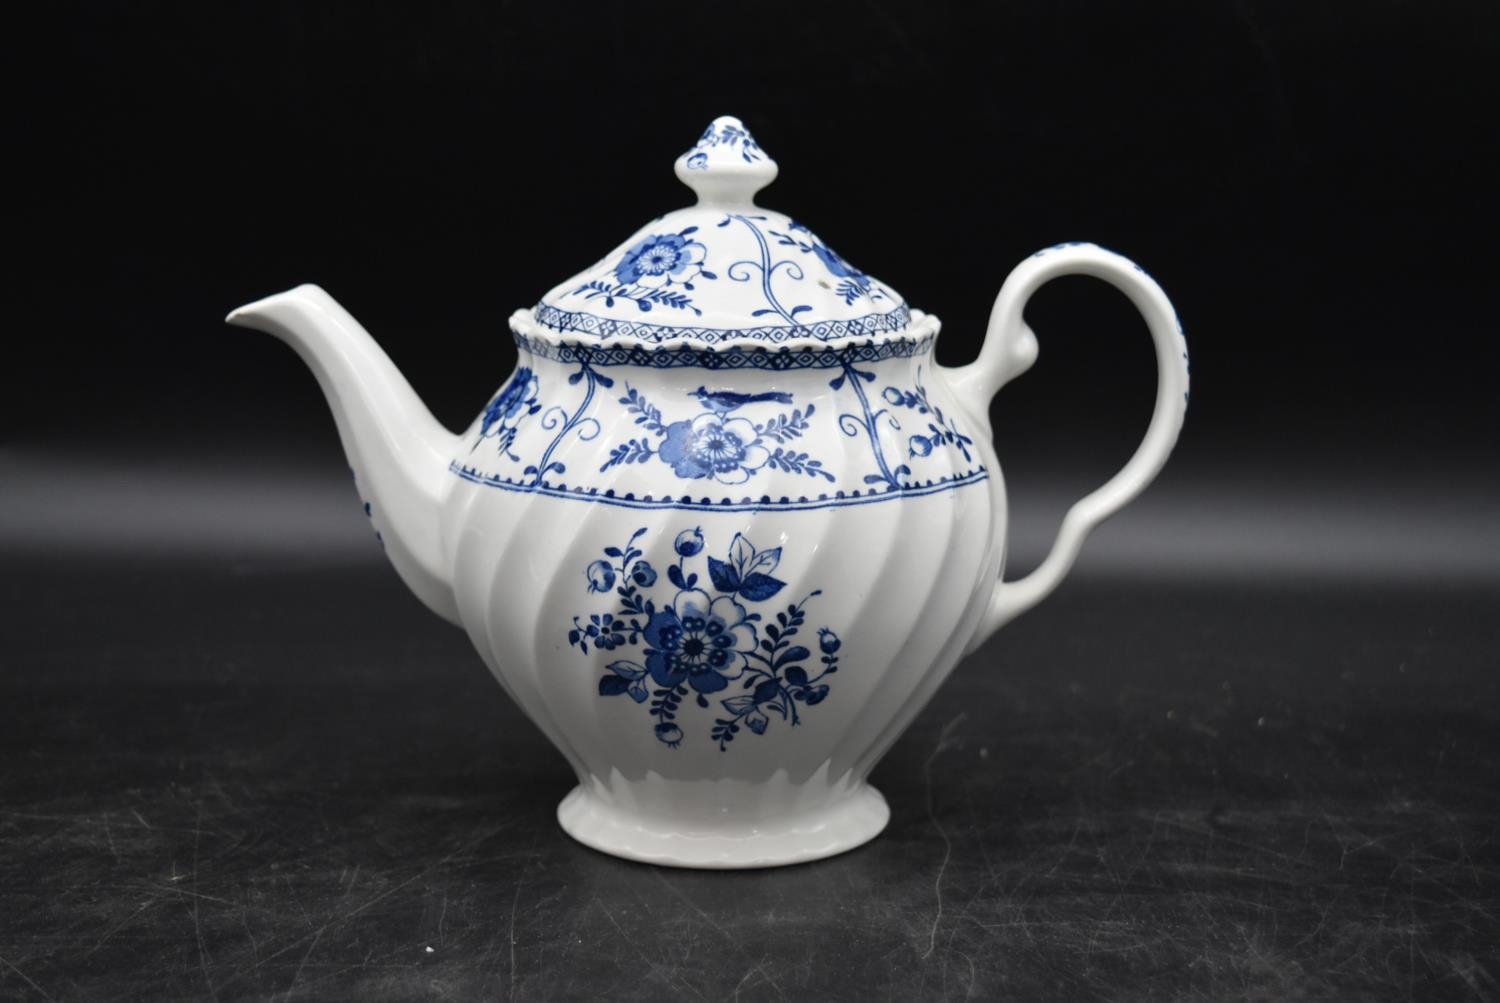 A Johnson Brothers 'Indies' design original stamped teapot along with a white unmarked teapot and - Image 2 of 16